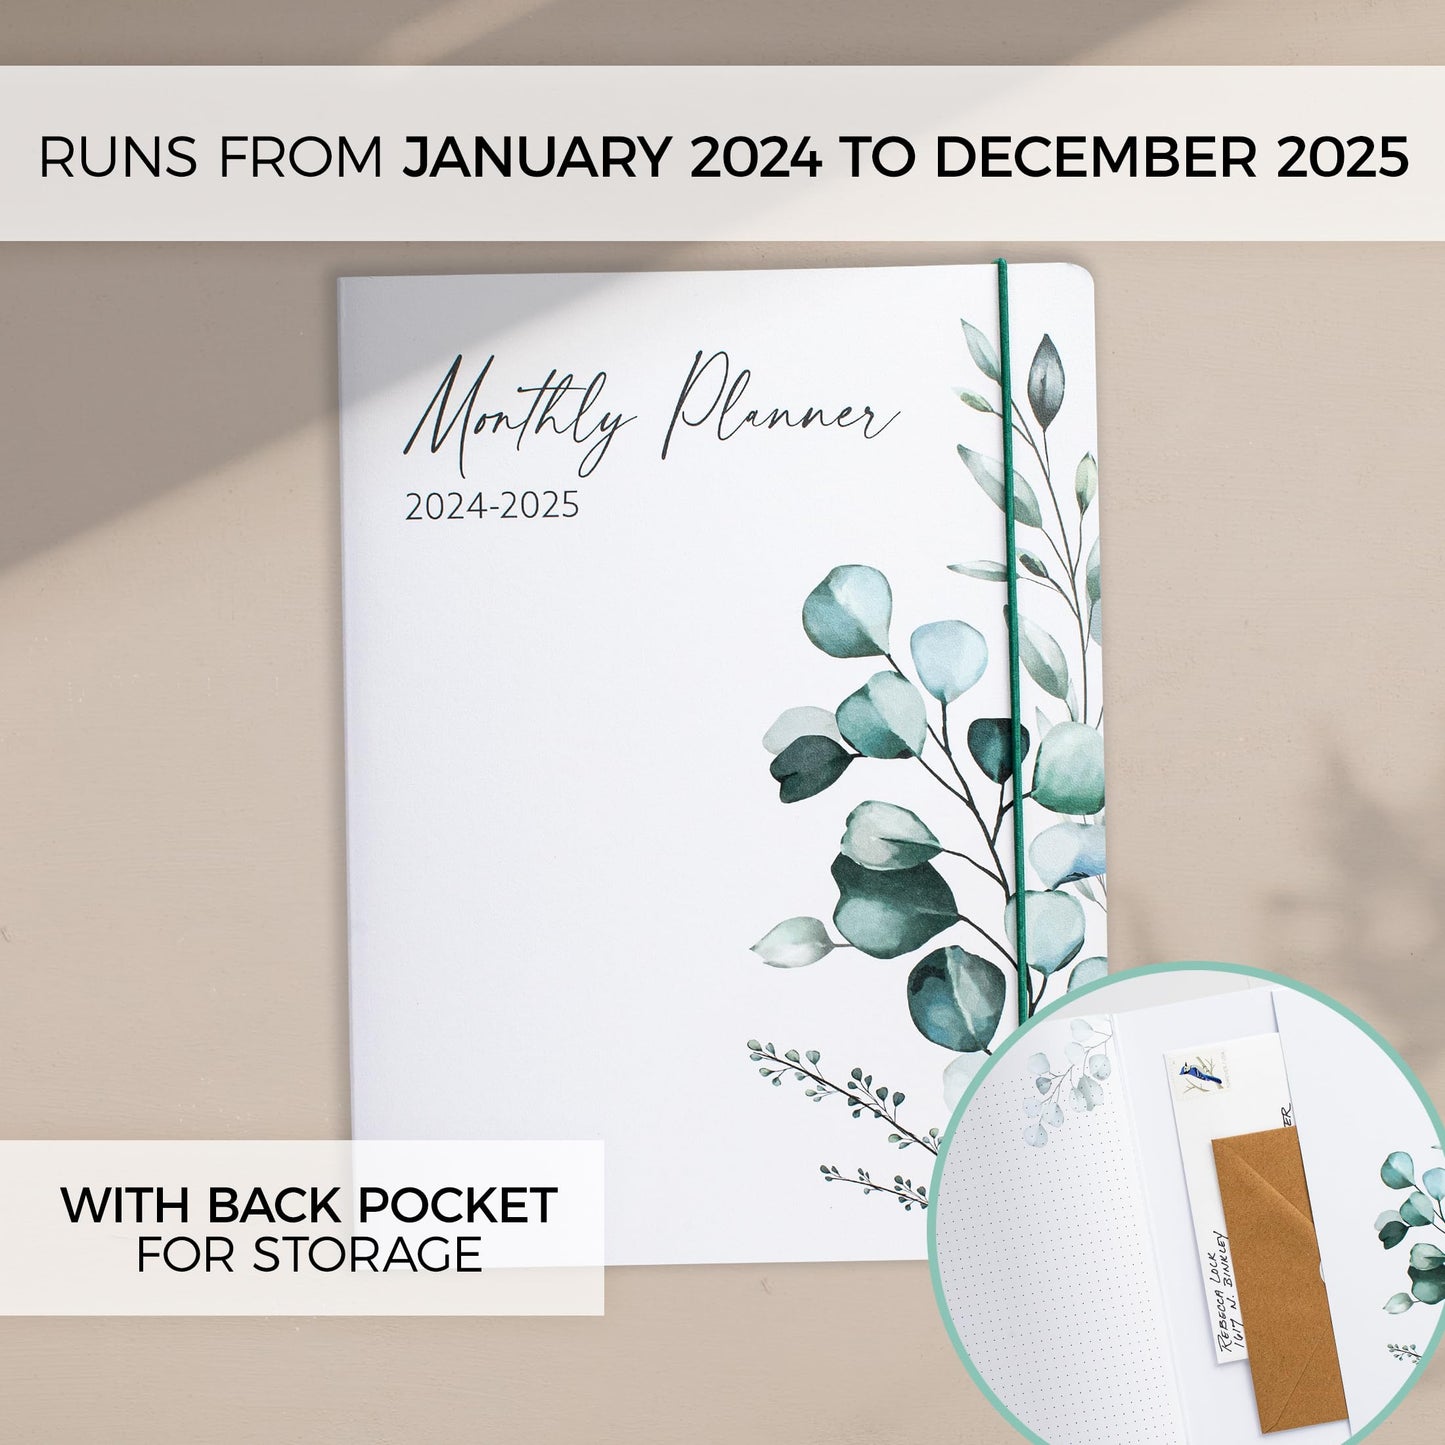 Simplified 2024-2025 Monthly Planner and Calendar Book - Beautiful Modern Greenery To Do List Notebook Easily Organizes Your Tasks to Boost Productivity - Runs From January 2024 Until December 2025